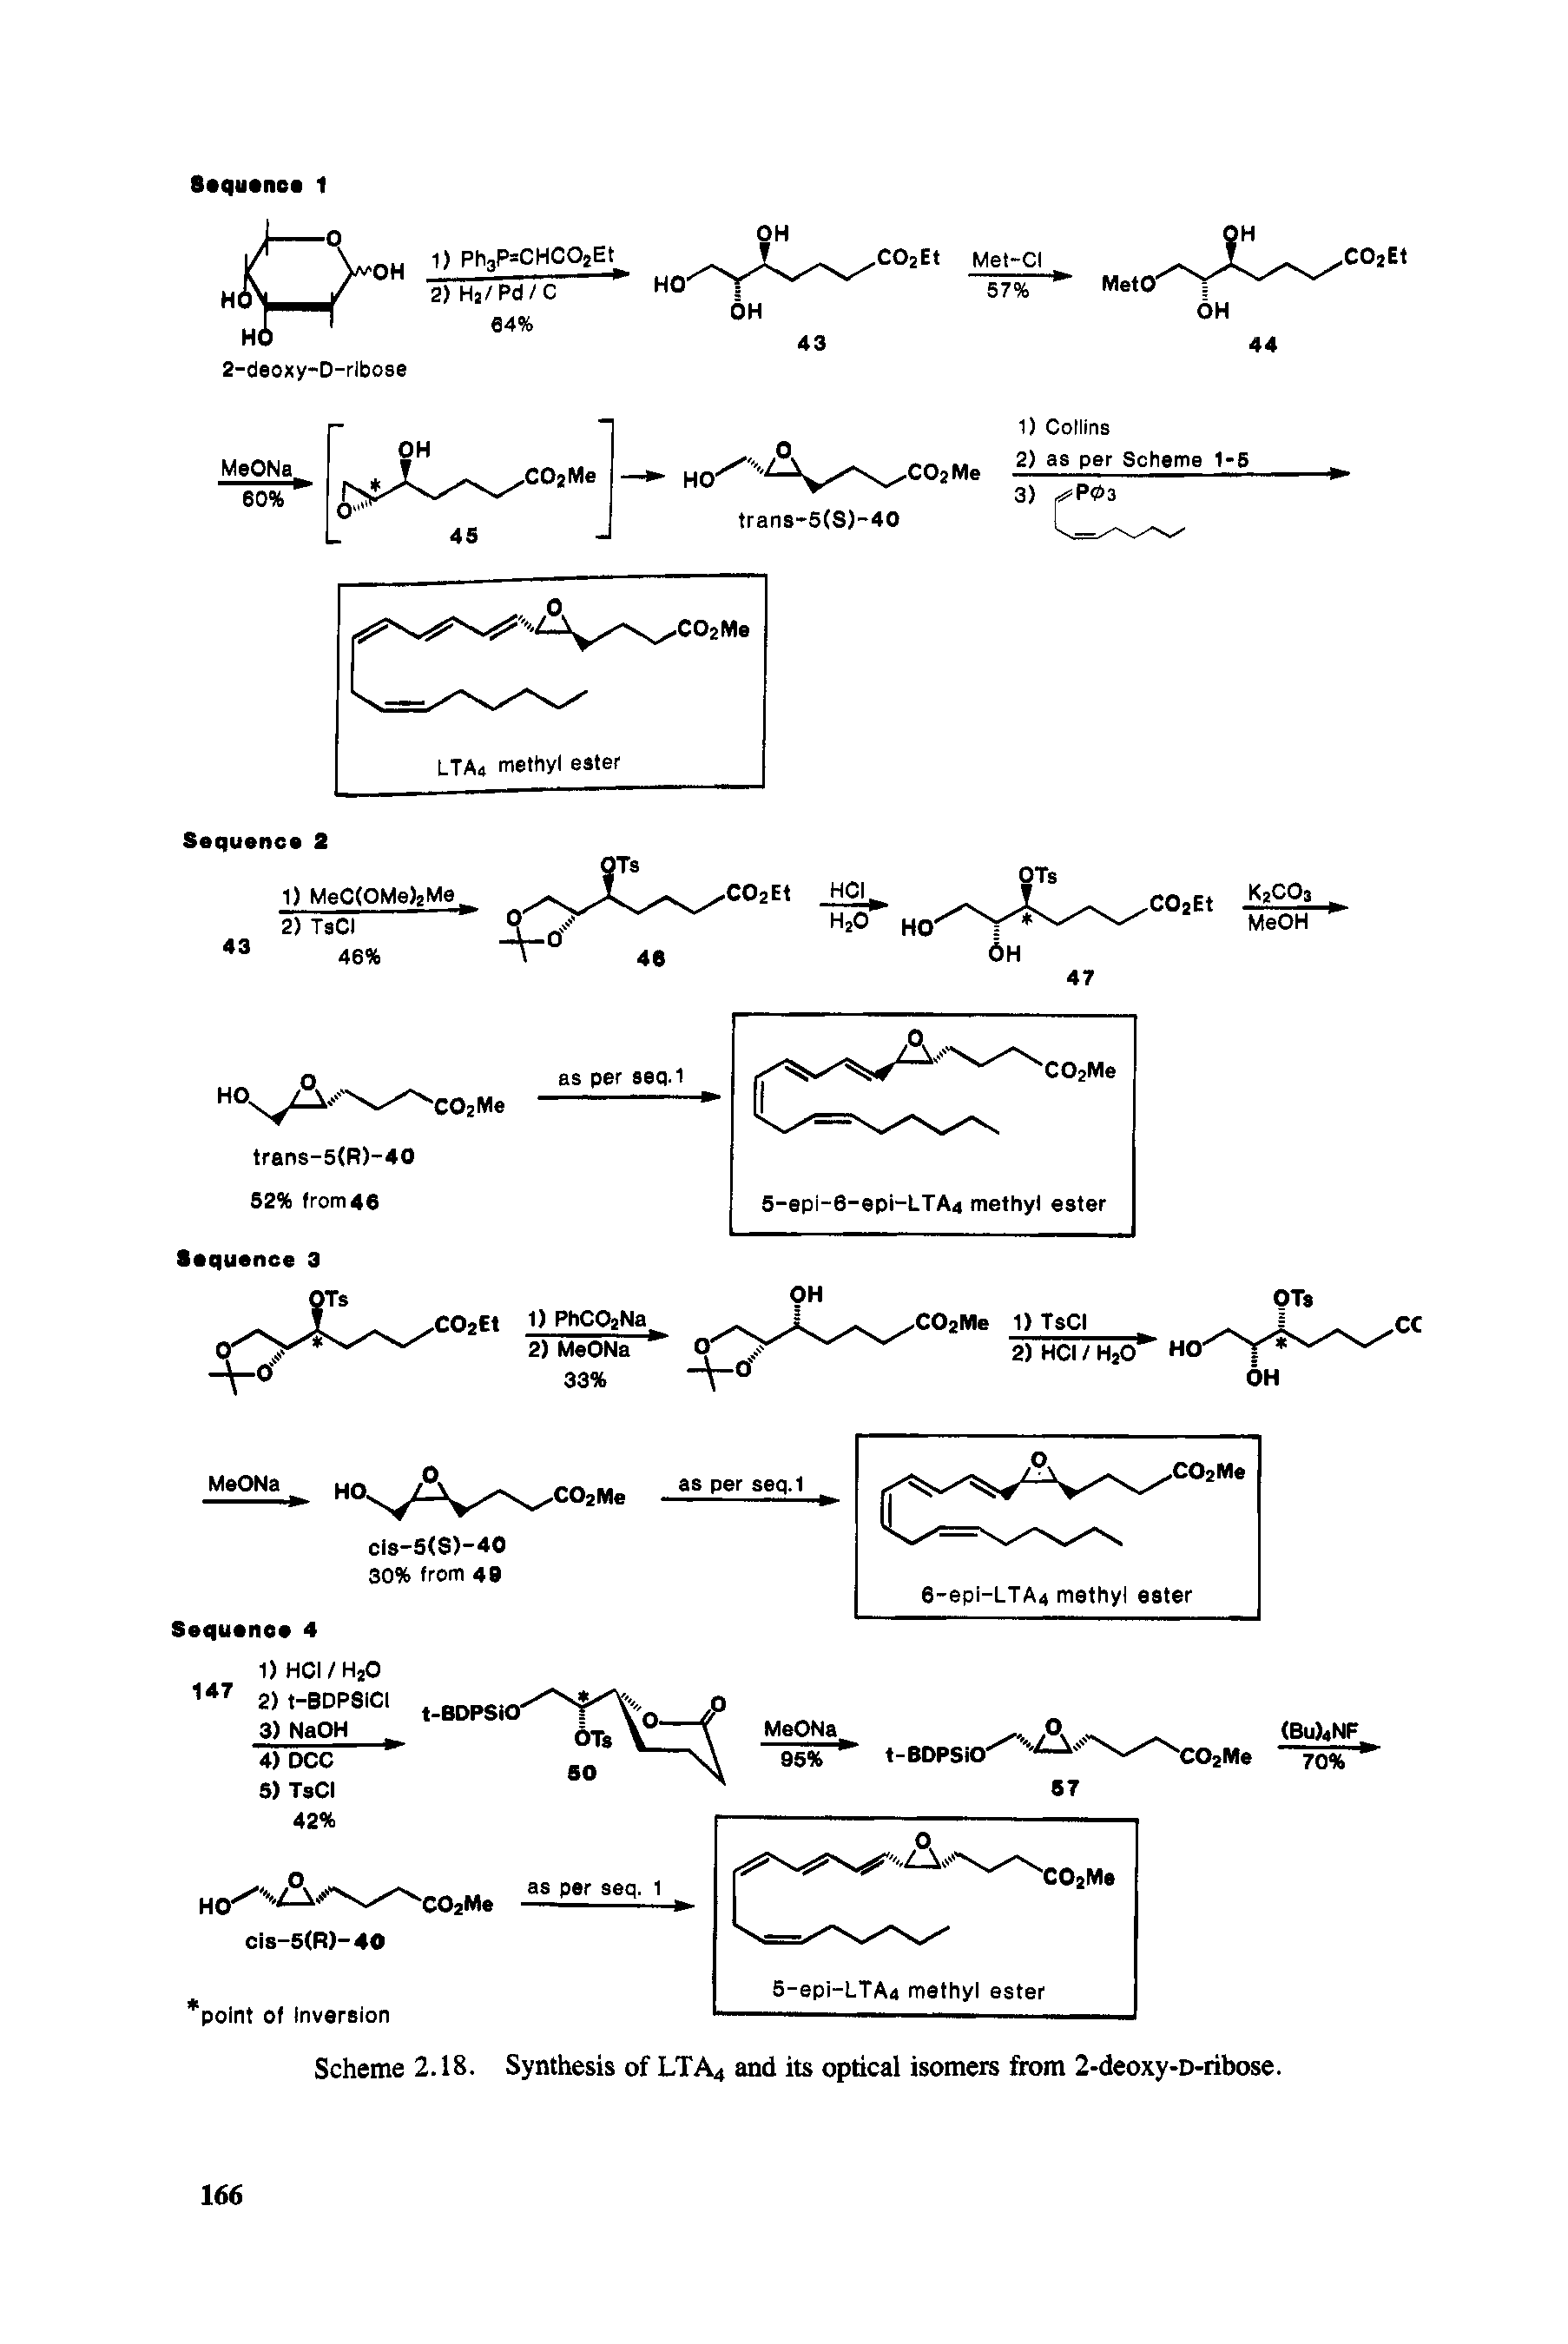 Scheme 2.18. Synthesis of LTA4 and its optical isomers from 2-deoxy-D-ribose.